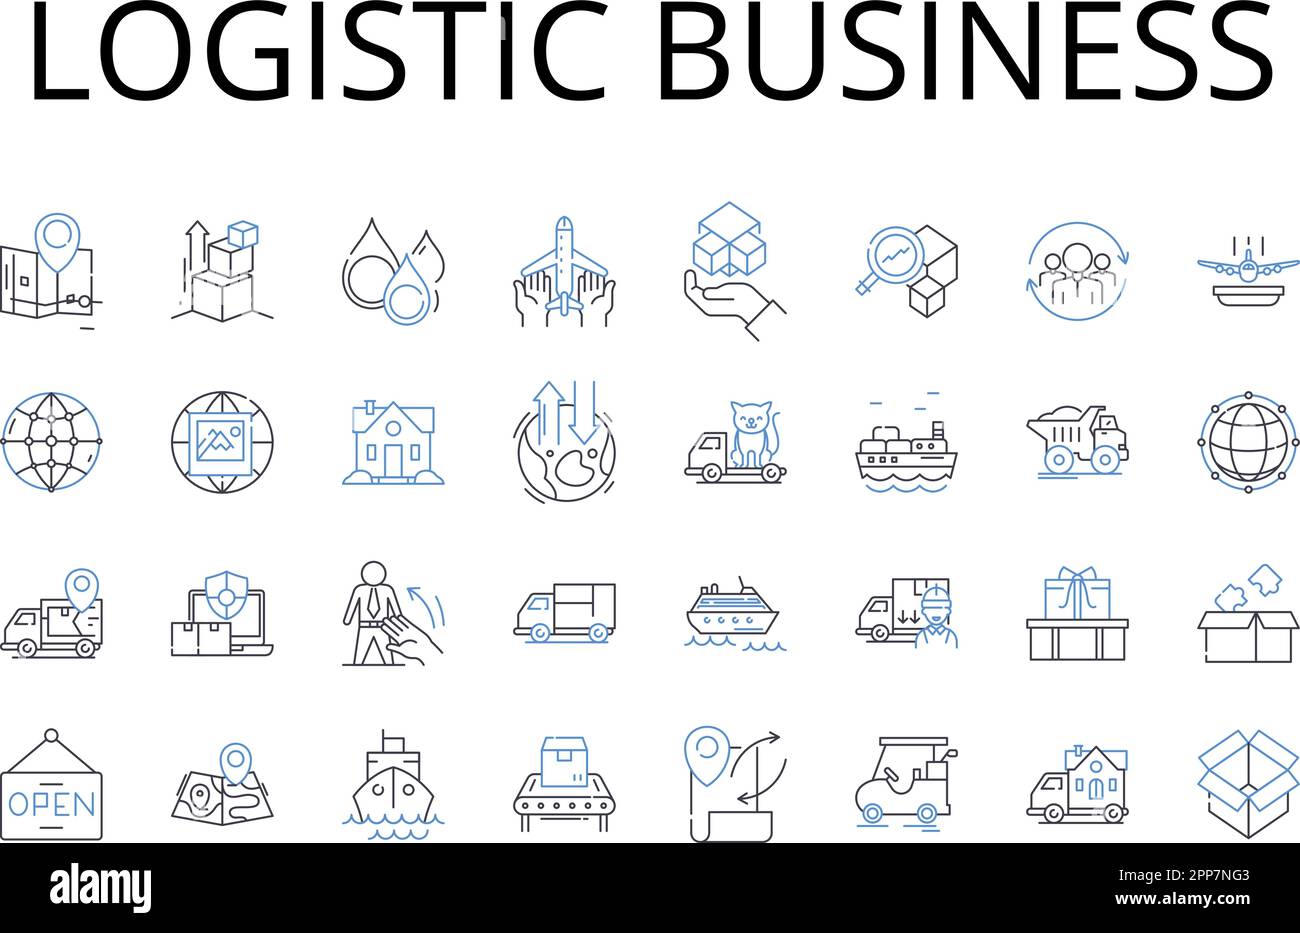 Logistic business line icons collection. Supply chain management, Distribution system, Transportation services, Fleet management, Warehousing Stock Vector